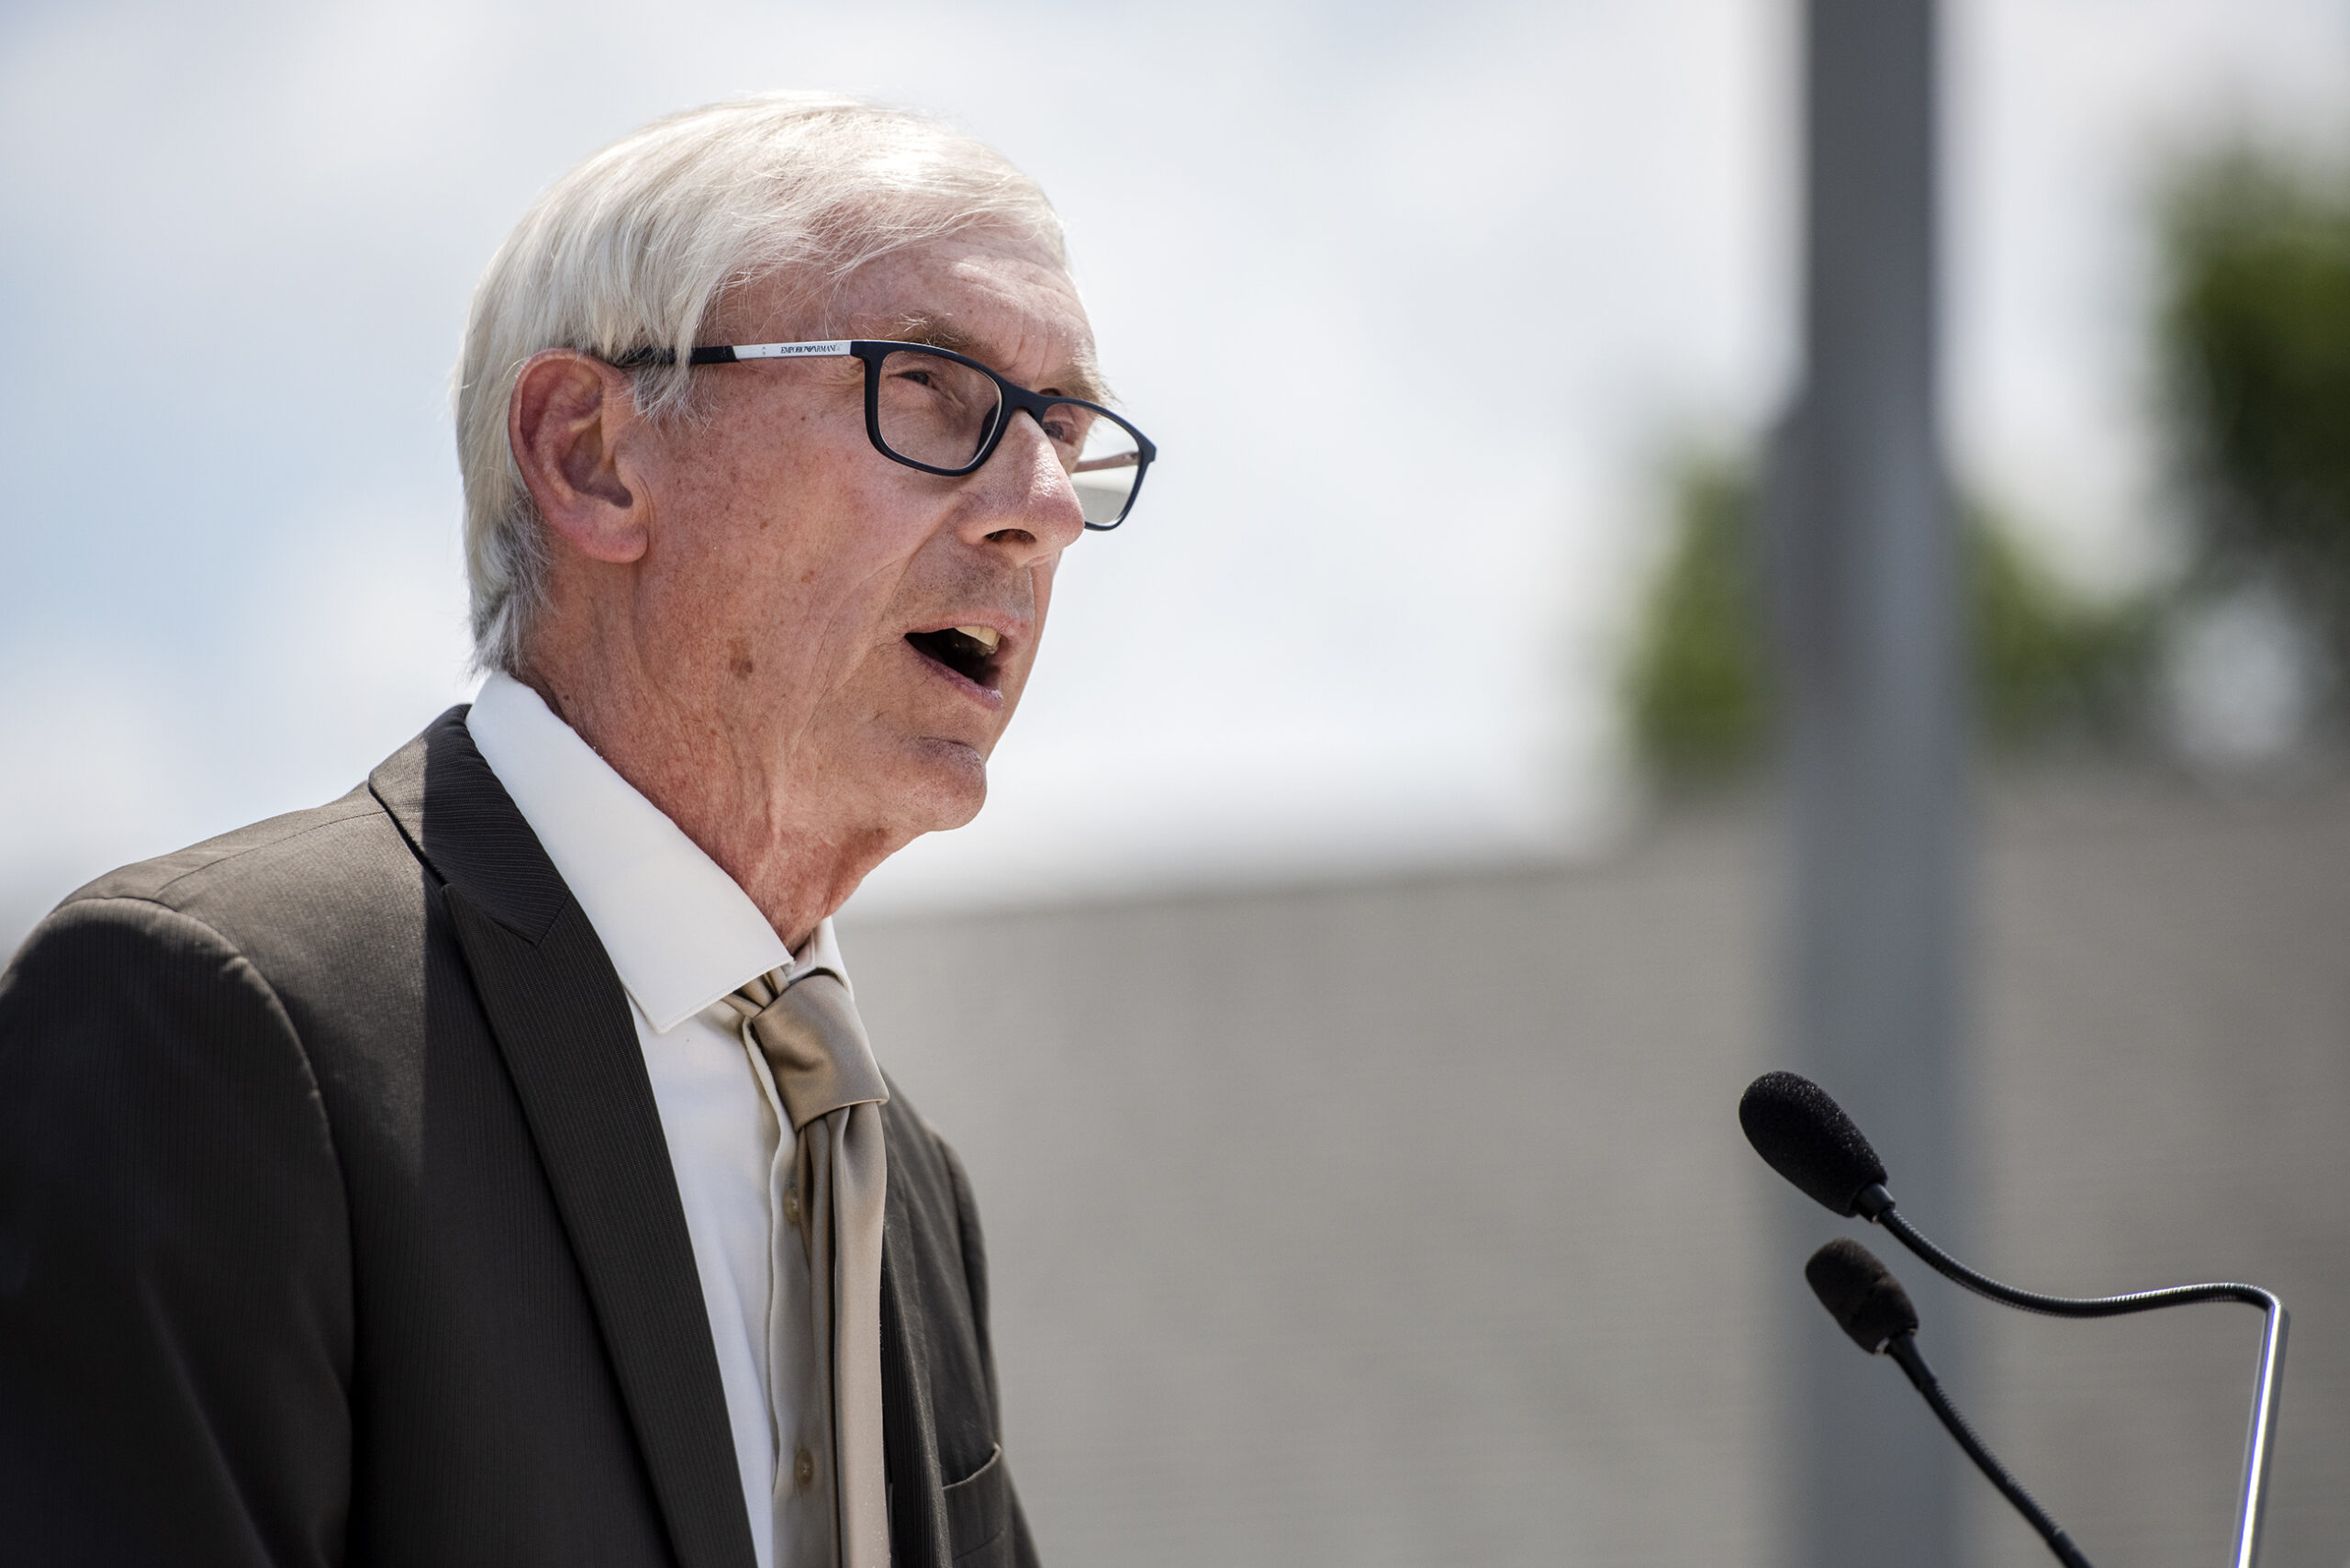 The sky can be seen behind Tony Evers as he speaks during a press conference.